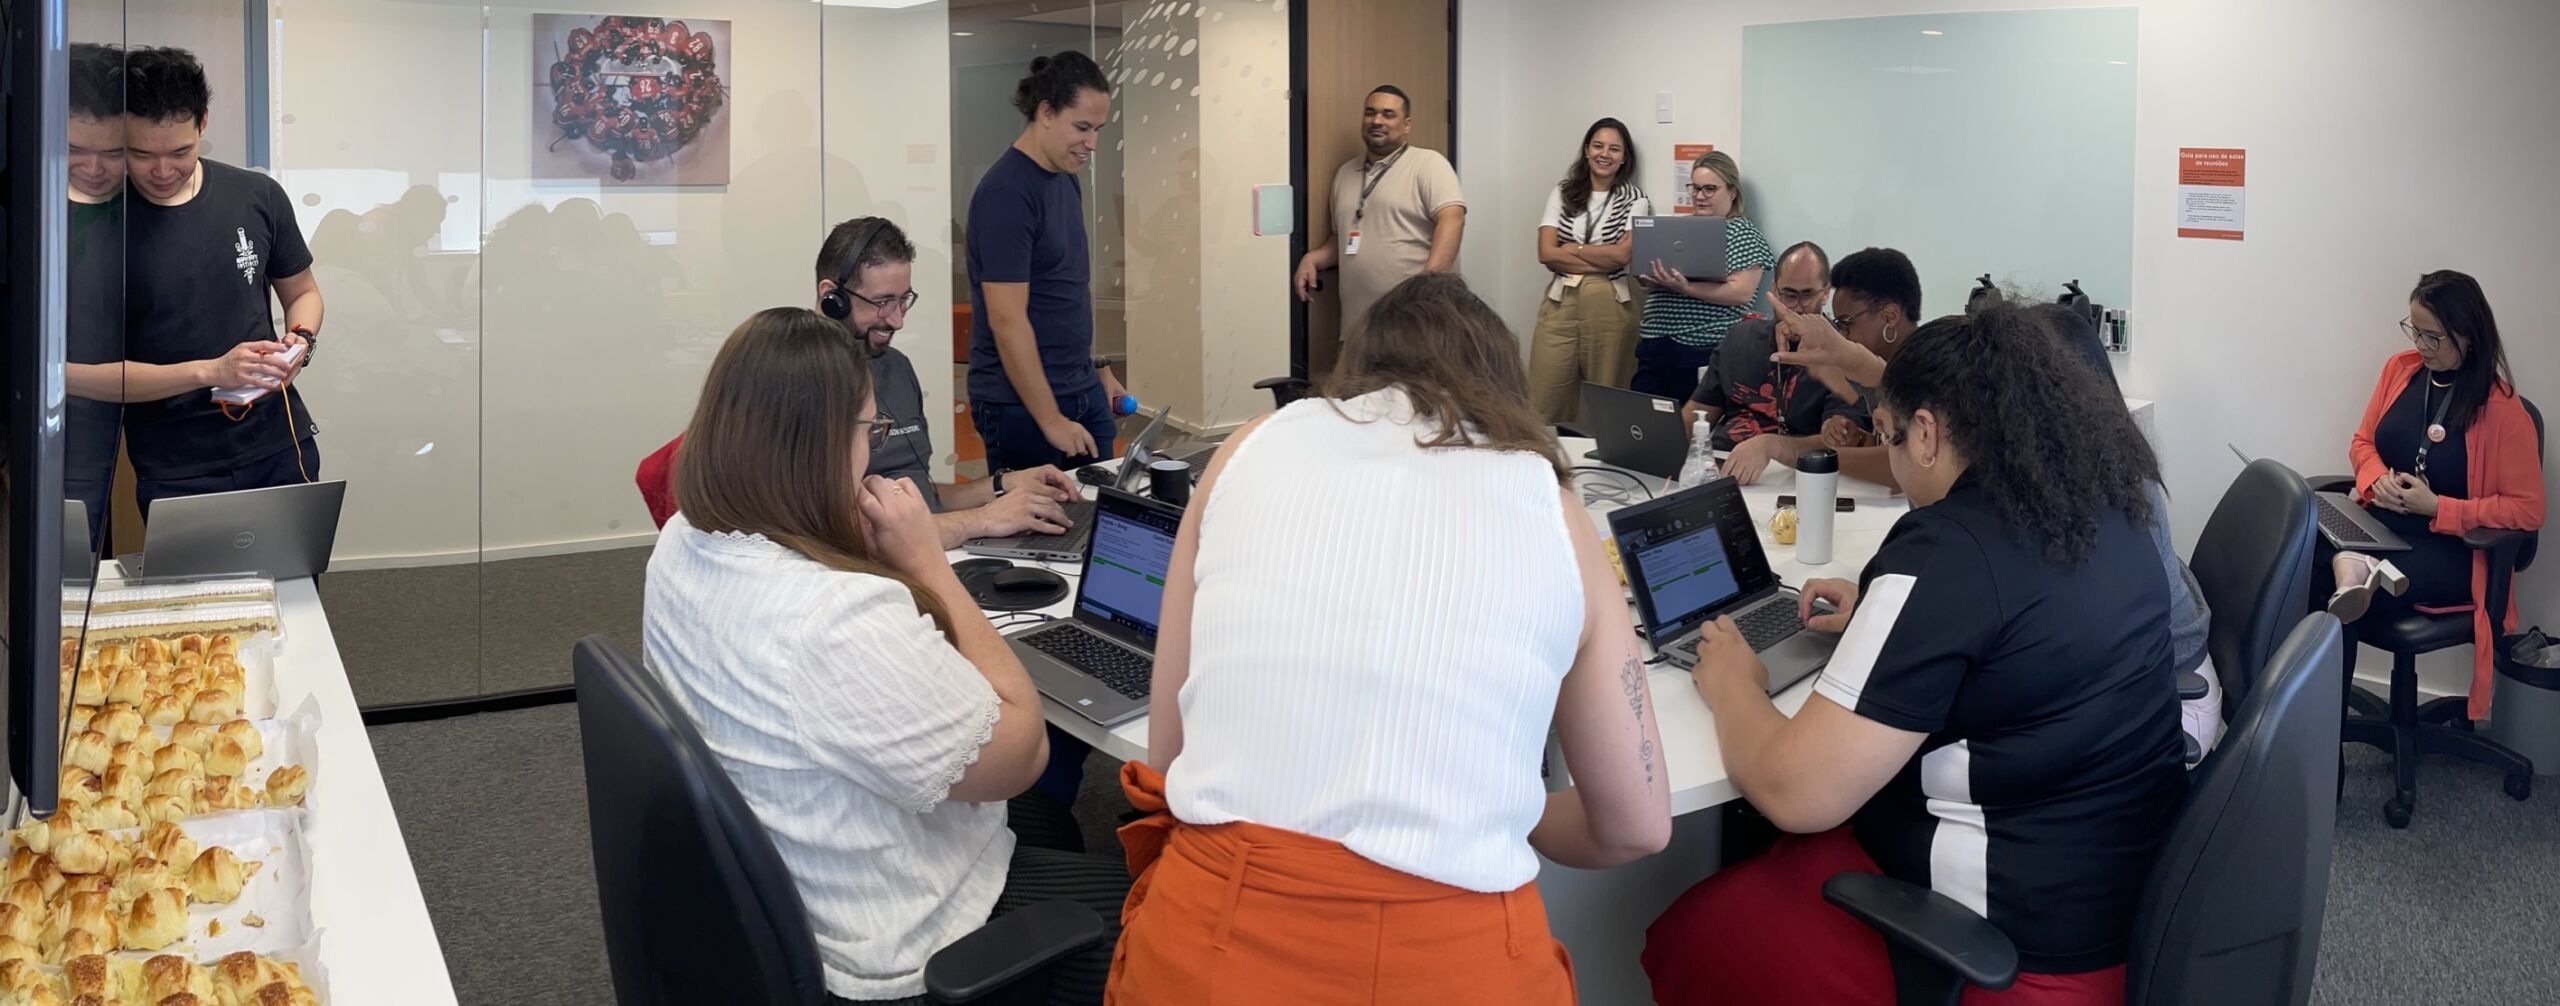 A group of teammates sit and stand around a desk looking at their laptops and talking to each other during the Global AI Hackathon.